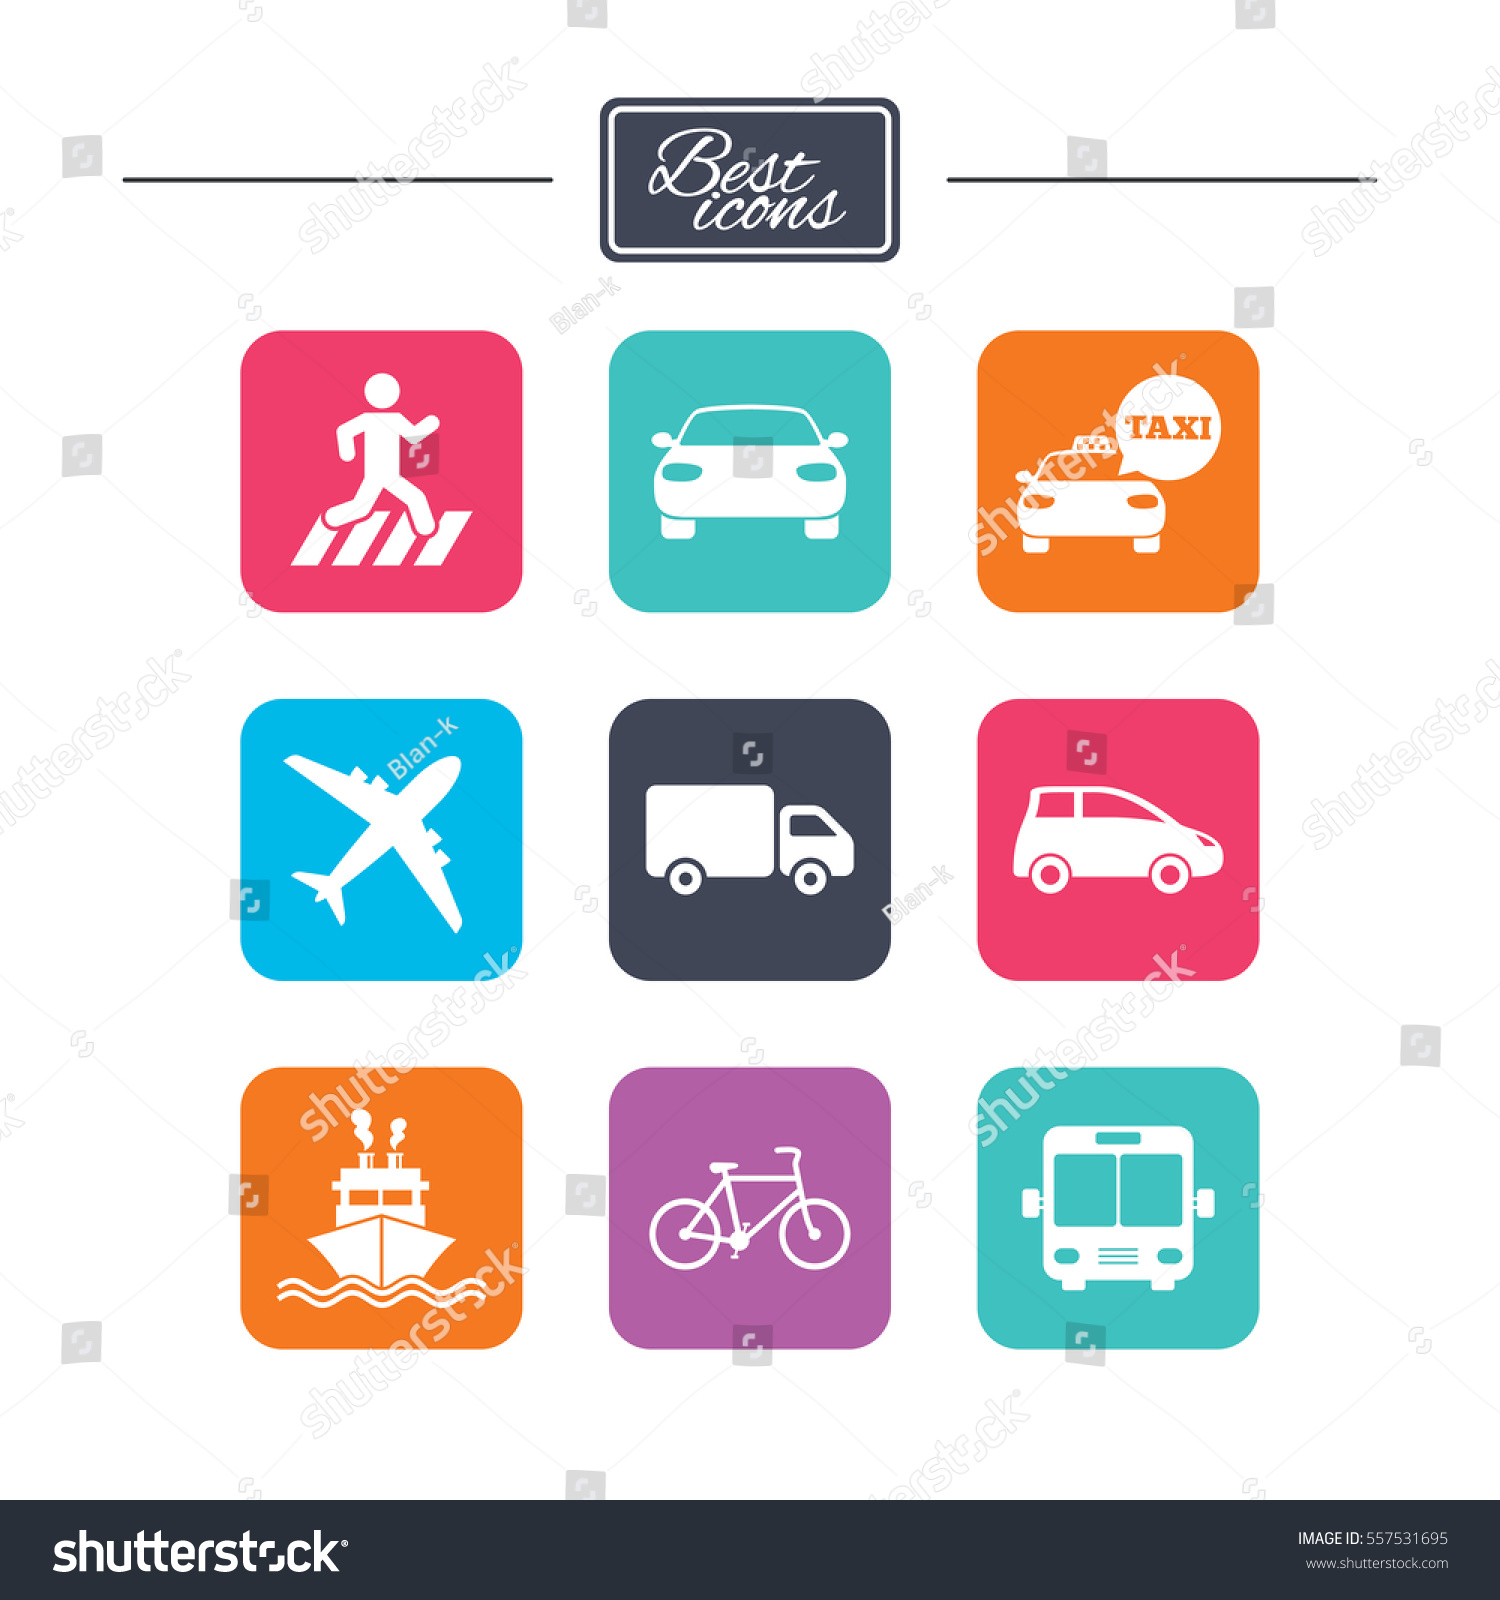 Transport icons. Car, bike, bus and taxi signs. Shipping delivery, pedestrian crossing symbols. Colorful flat square buttons with icons. Vector #557531695